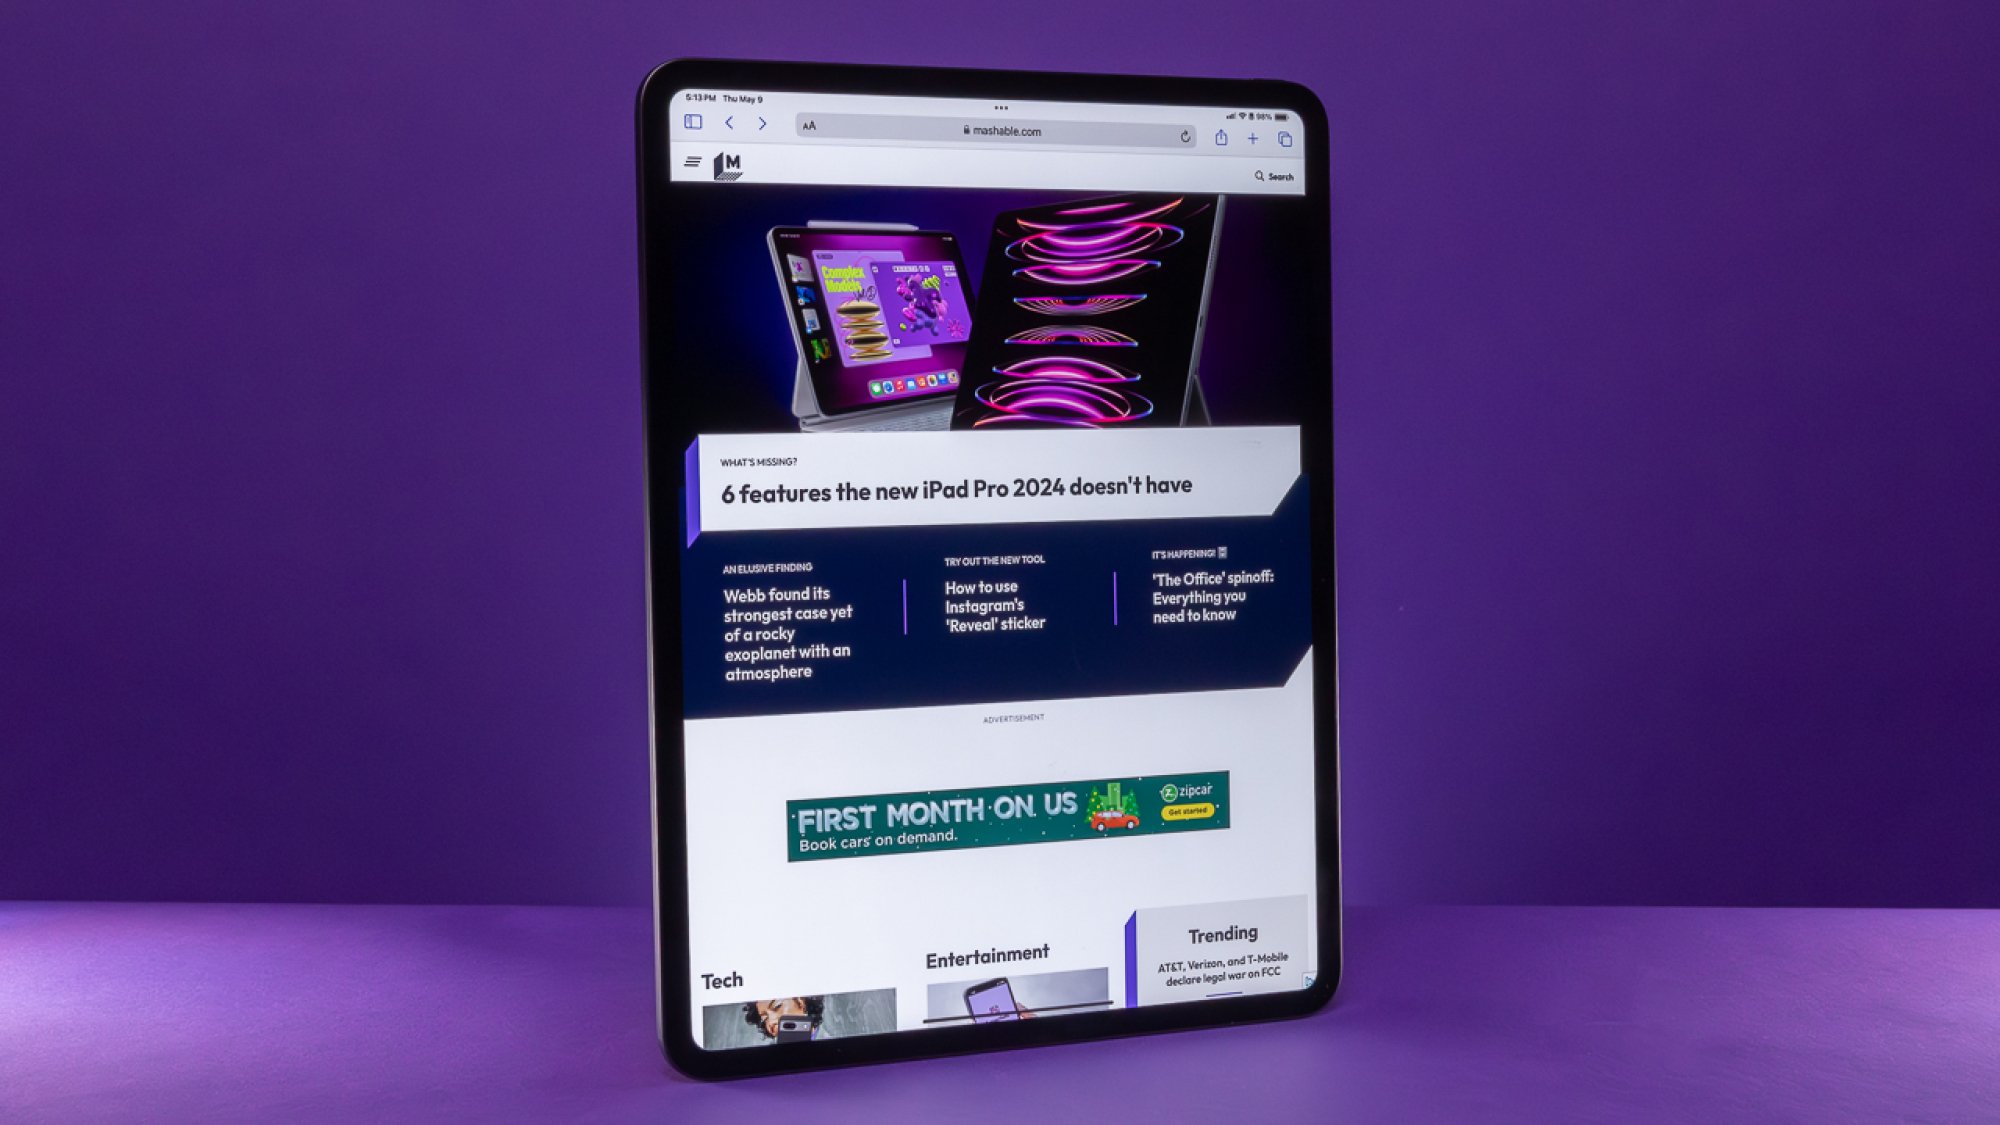 13-inch iPad Pro 2024 in portrait mode against a purple background